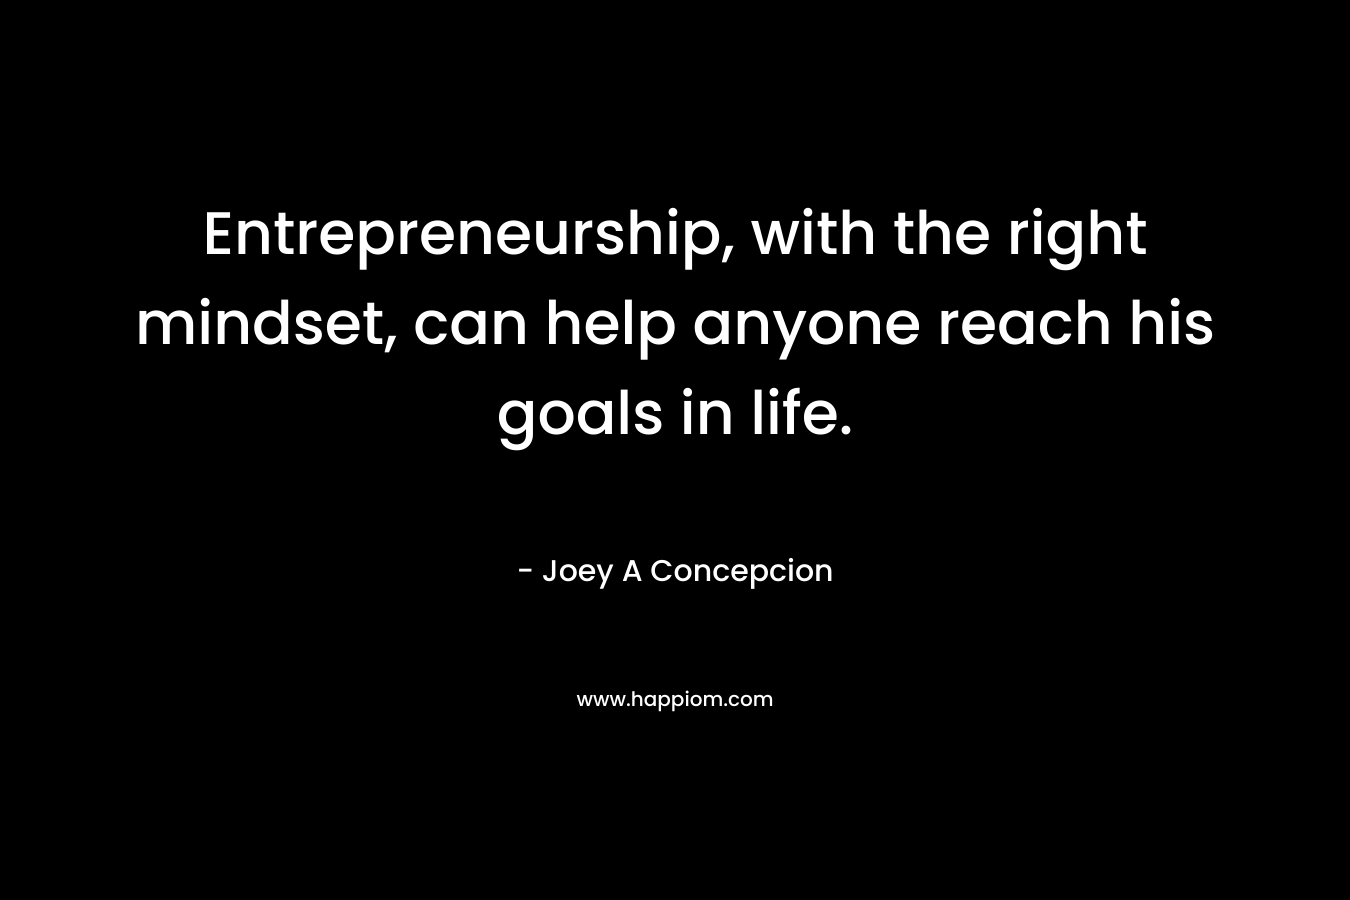 Entrepreneurship, with the right mindset, can help anyone reach his goals in life.